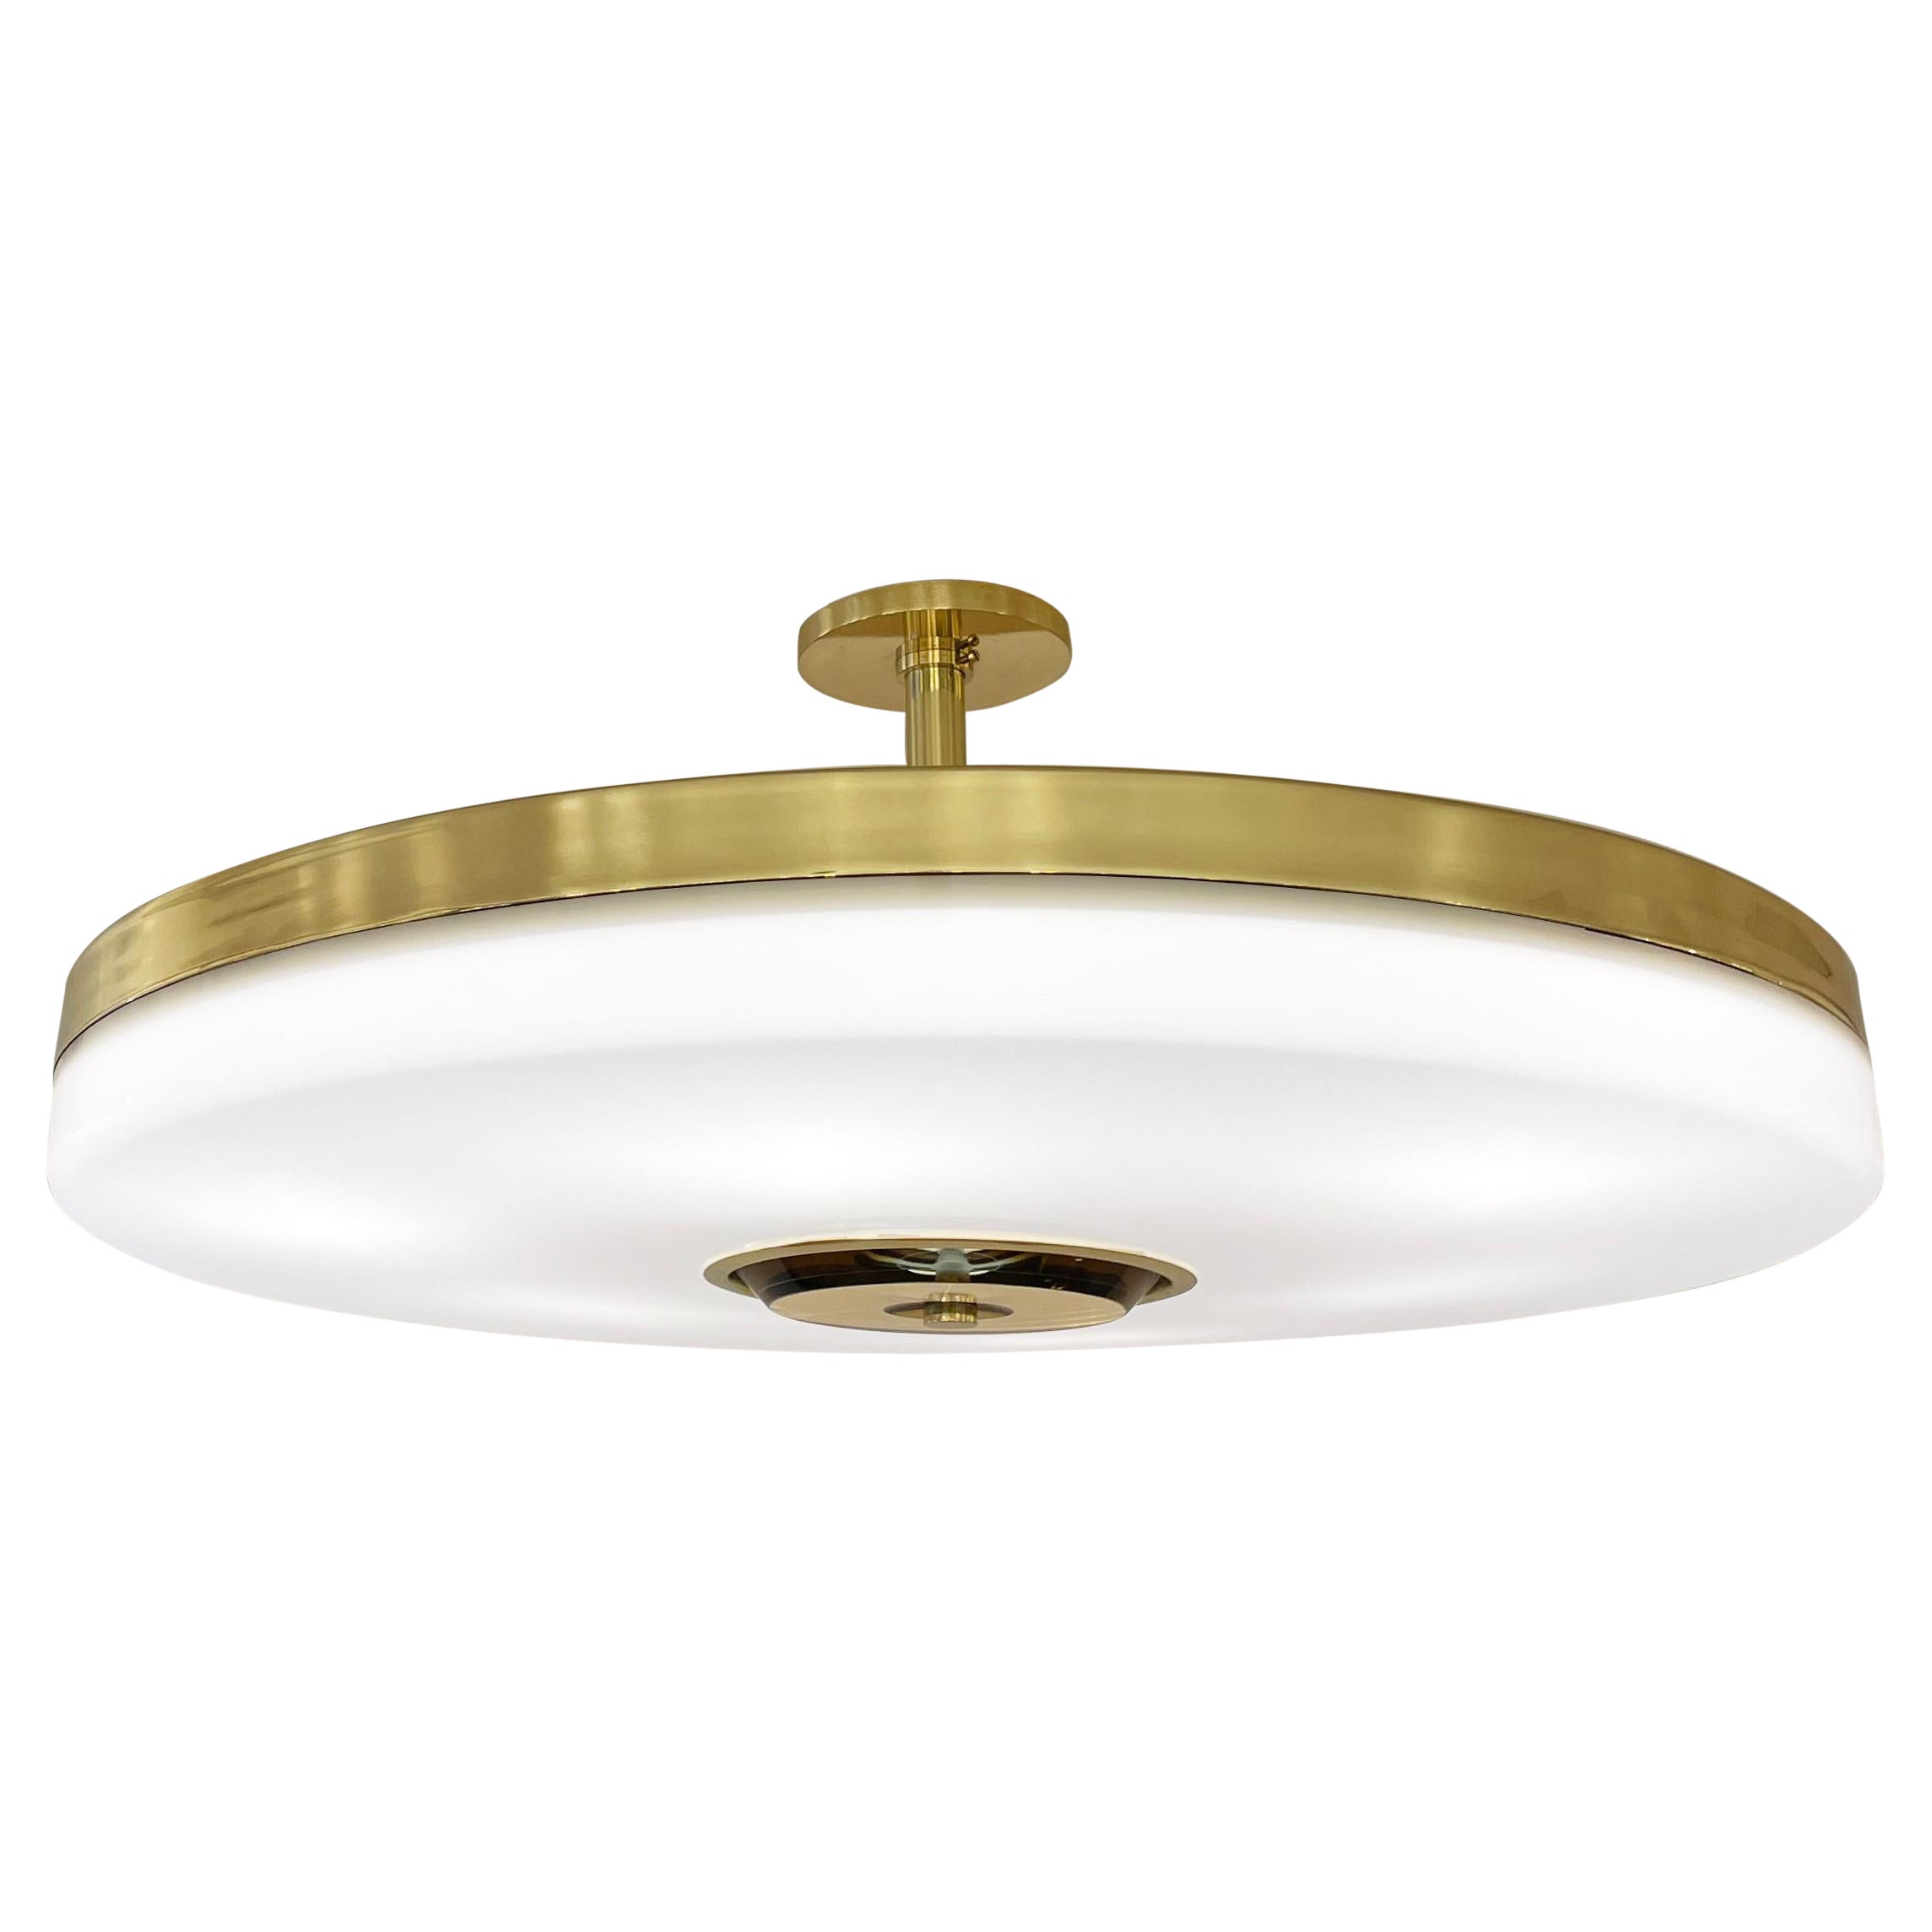 Italian Iris Grande Ceiling Light by Gaspare Asaro-Polished Nickel Finish For Sale